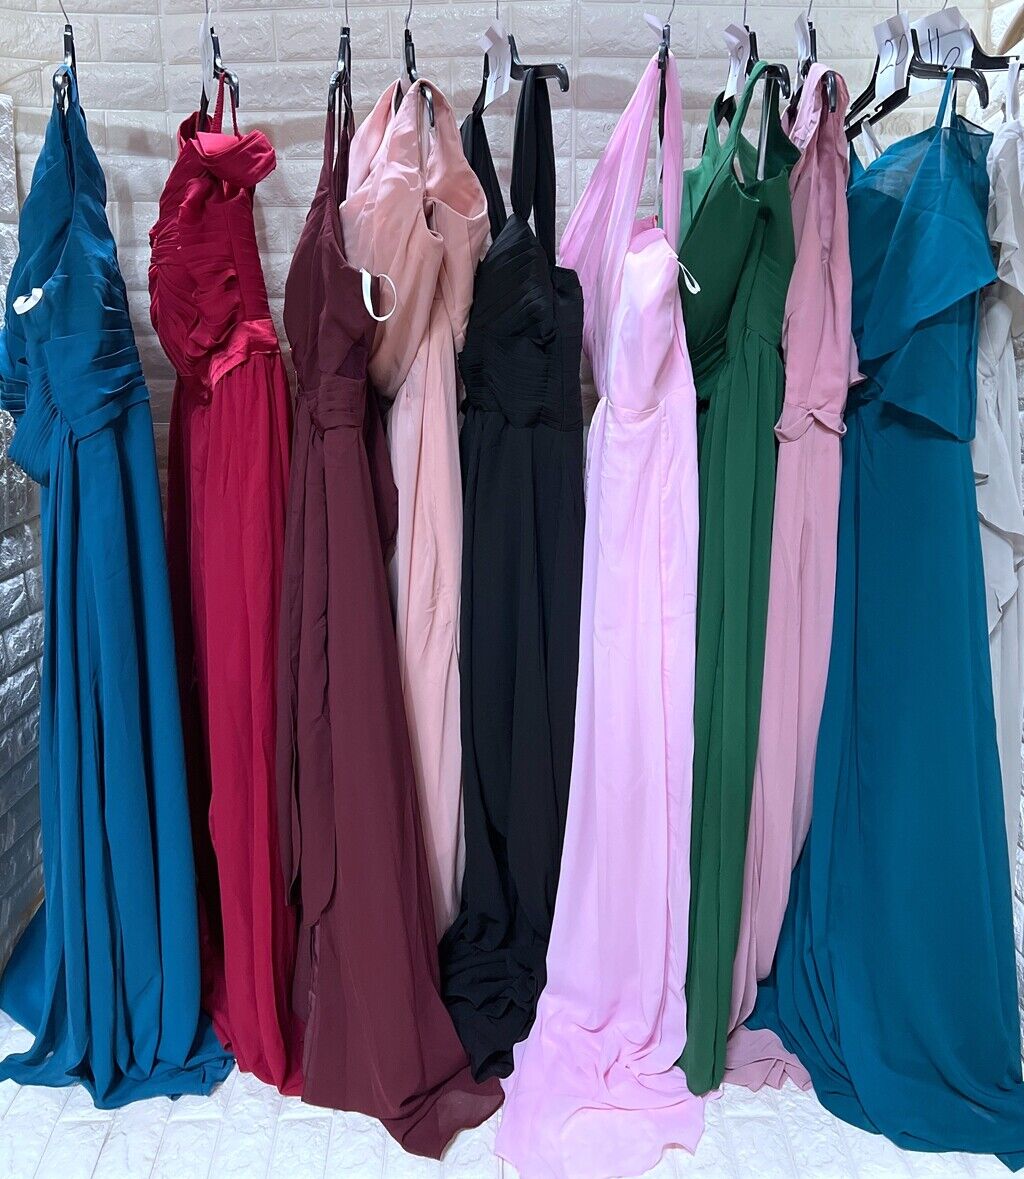 Wholesale Lot of 10pcs Women's Prom Bridesmaid dresses Formal Party Gown dress Без бренда